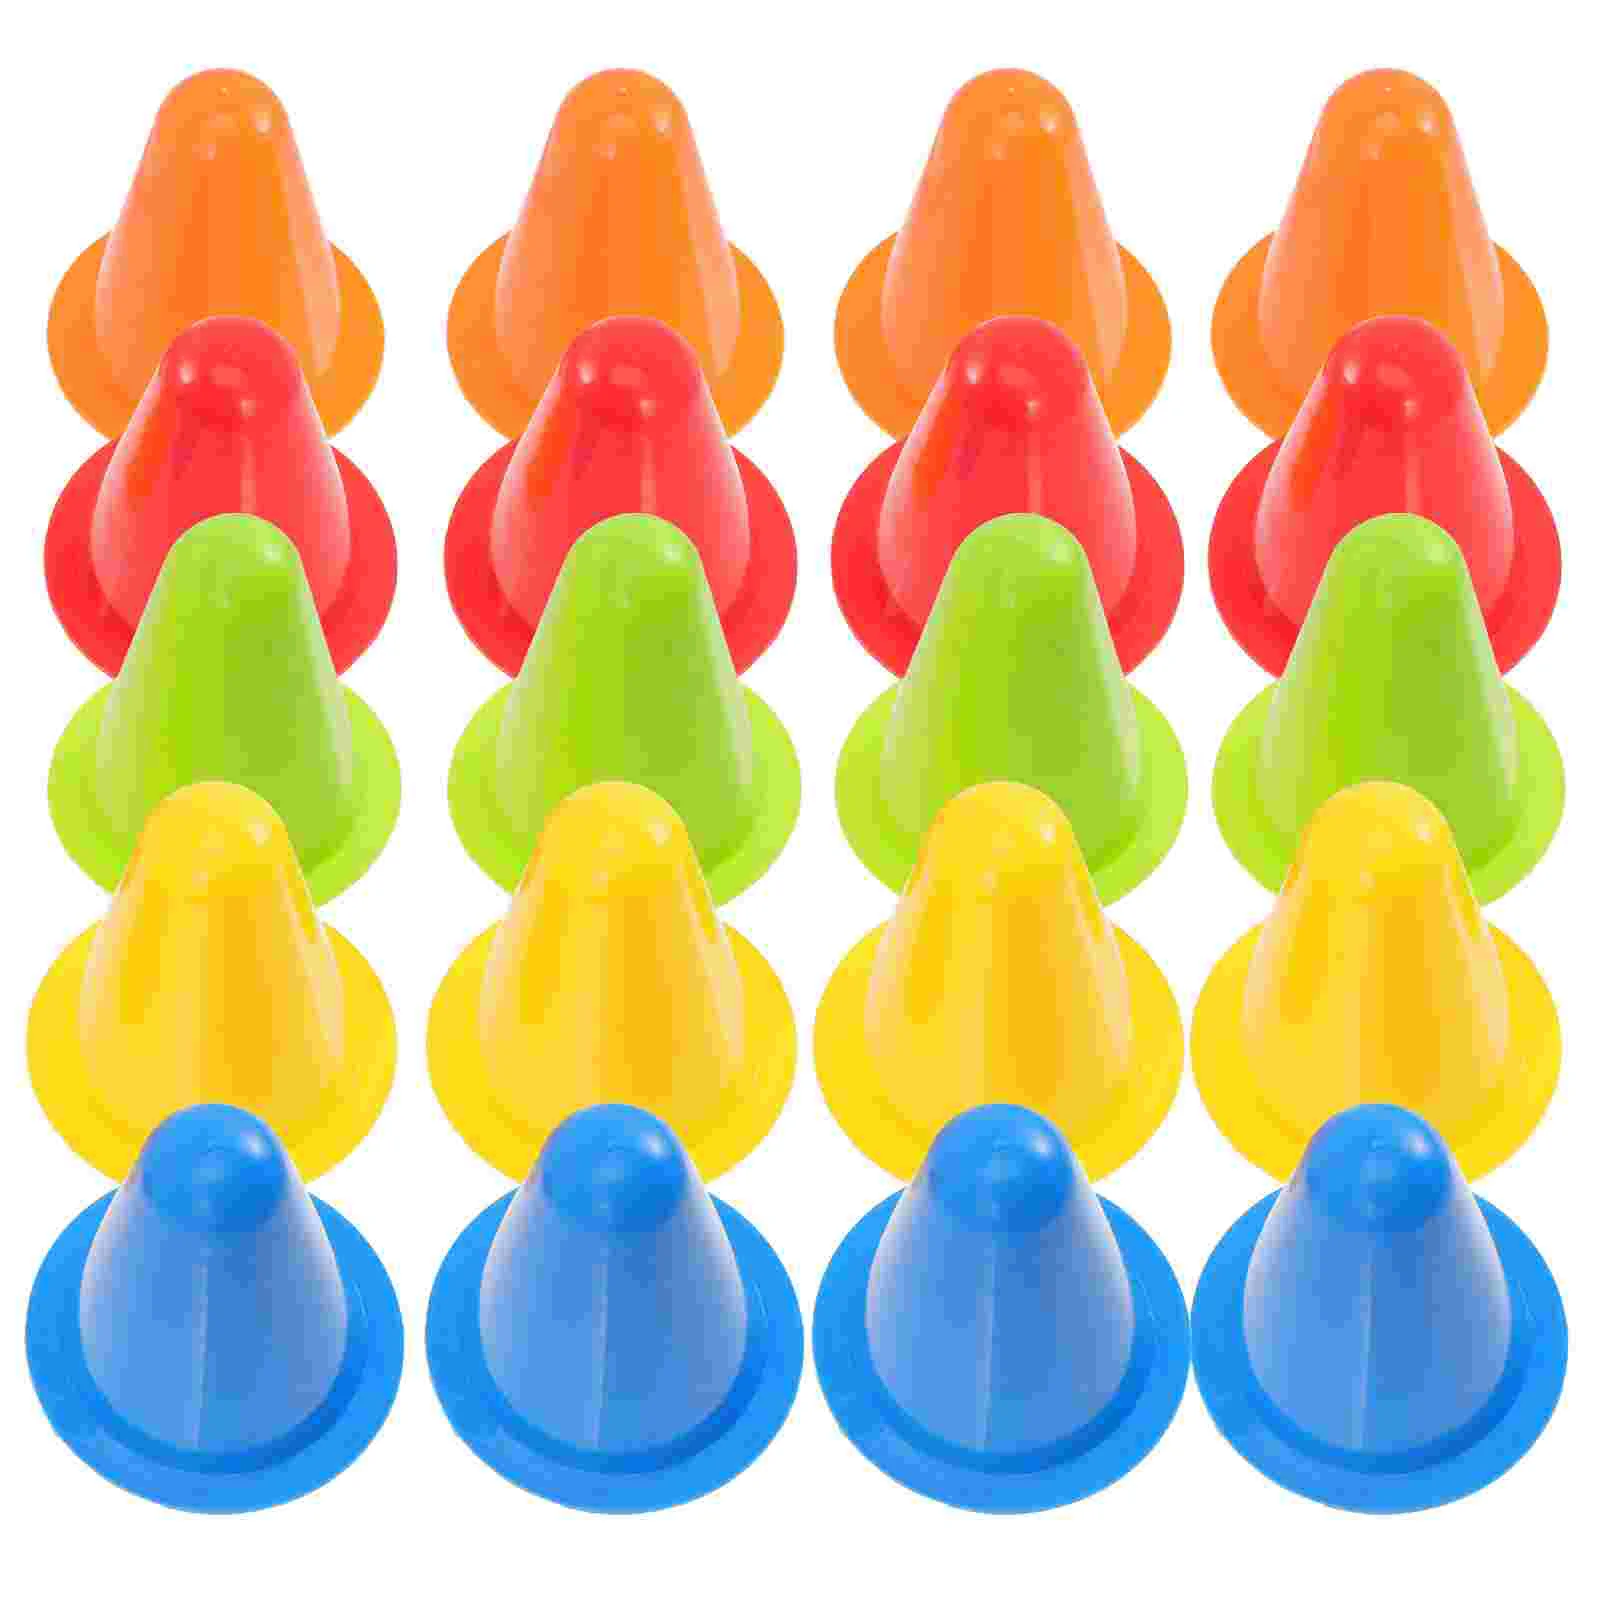 25 Pcs Kid Football Roller Skating Obstacles School Cone Soccer Practice Cones Kids Plastic Sports Drill Small Child